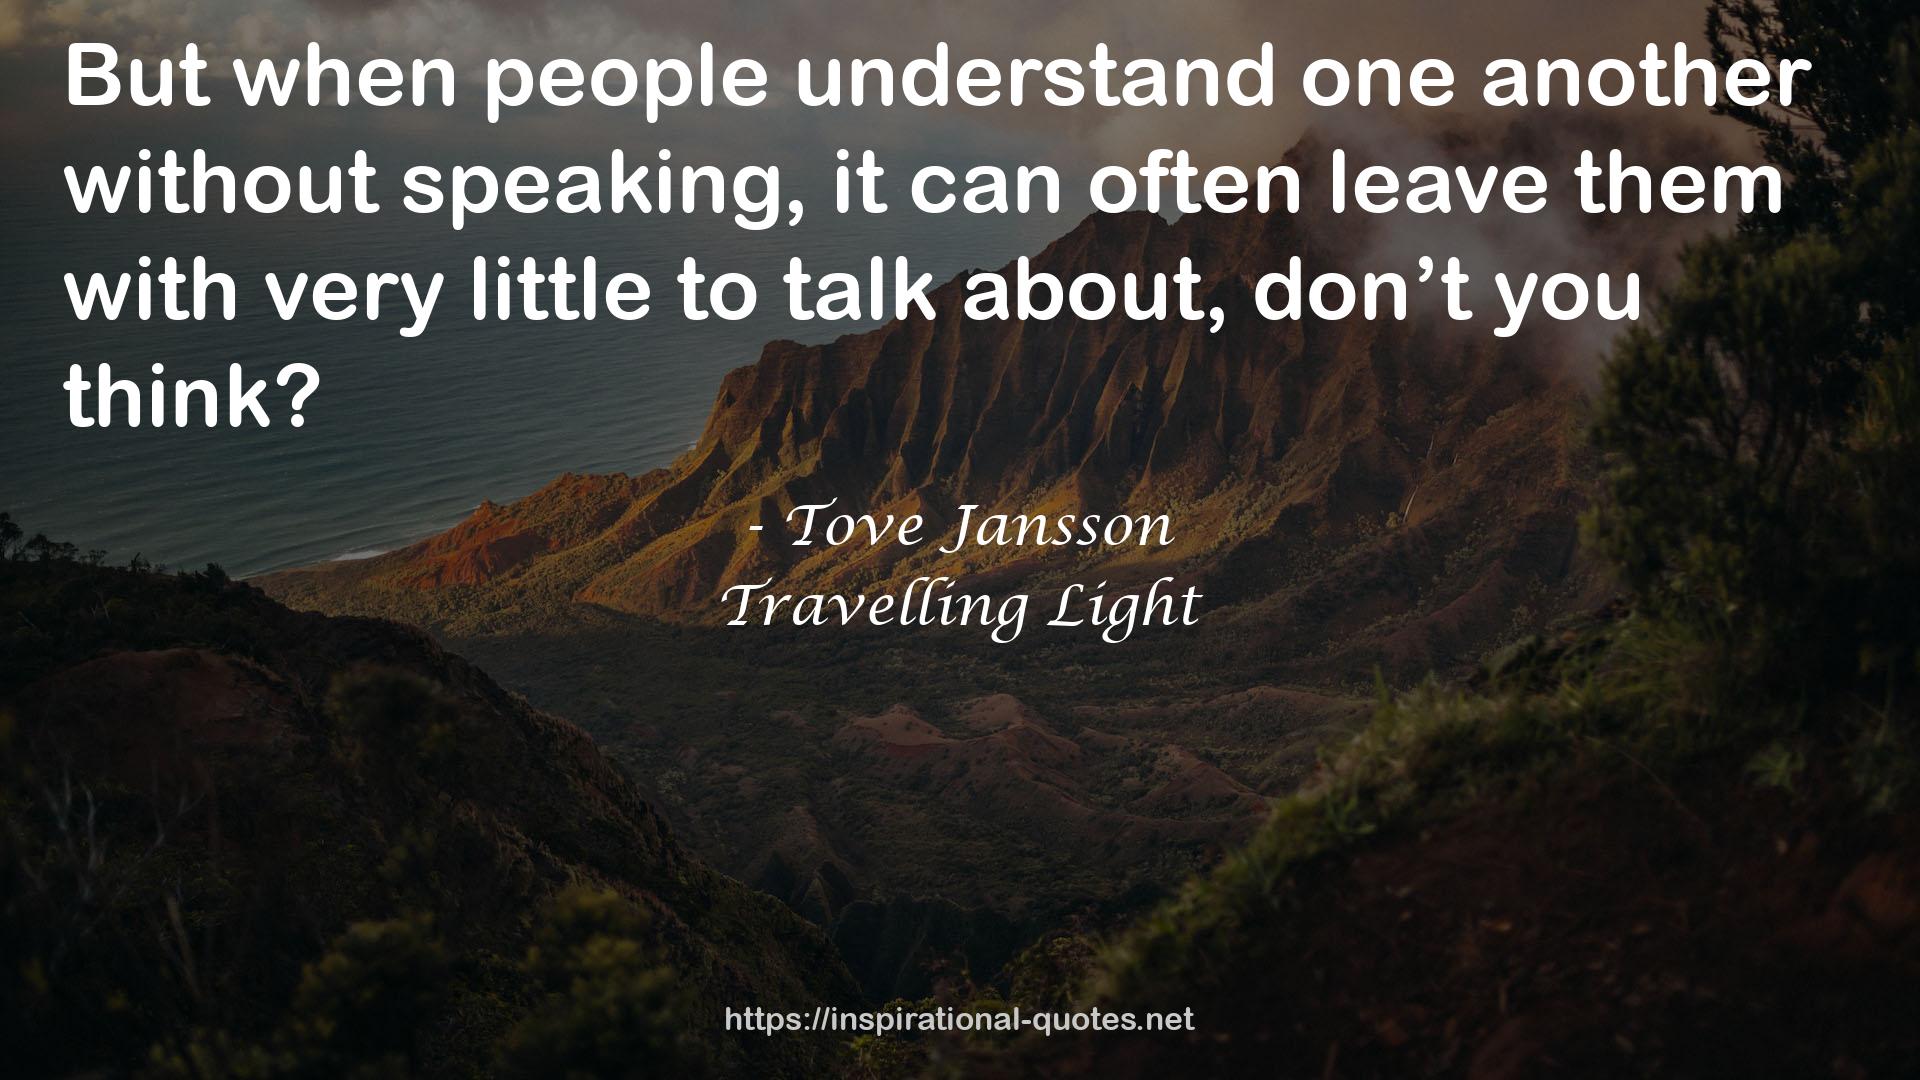 Travelling Light QUOTES